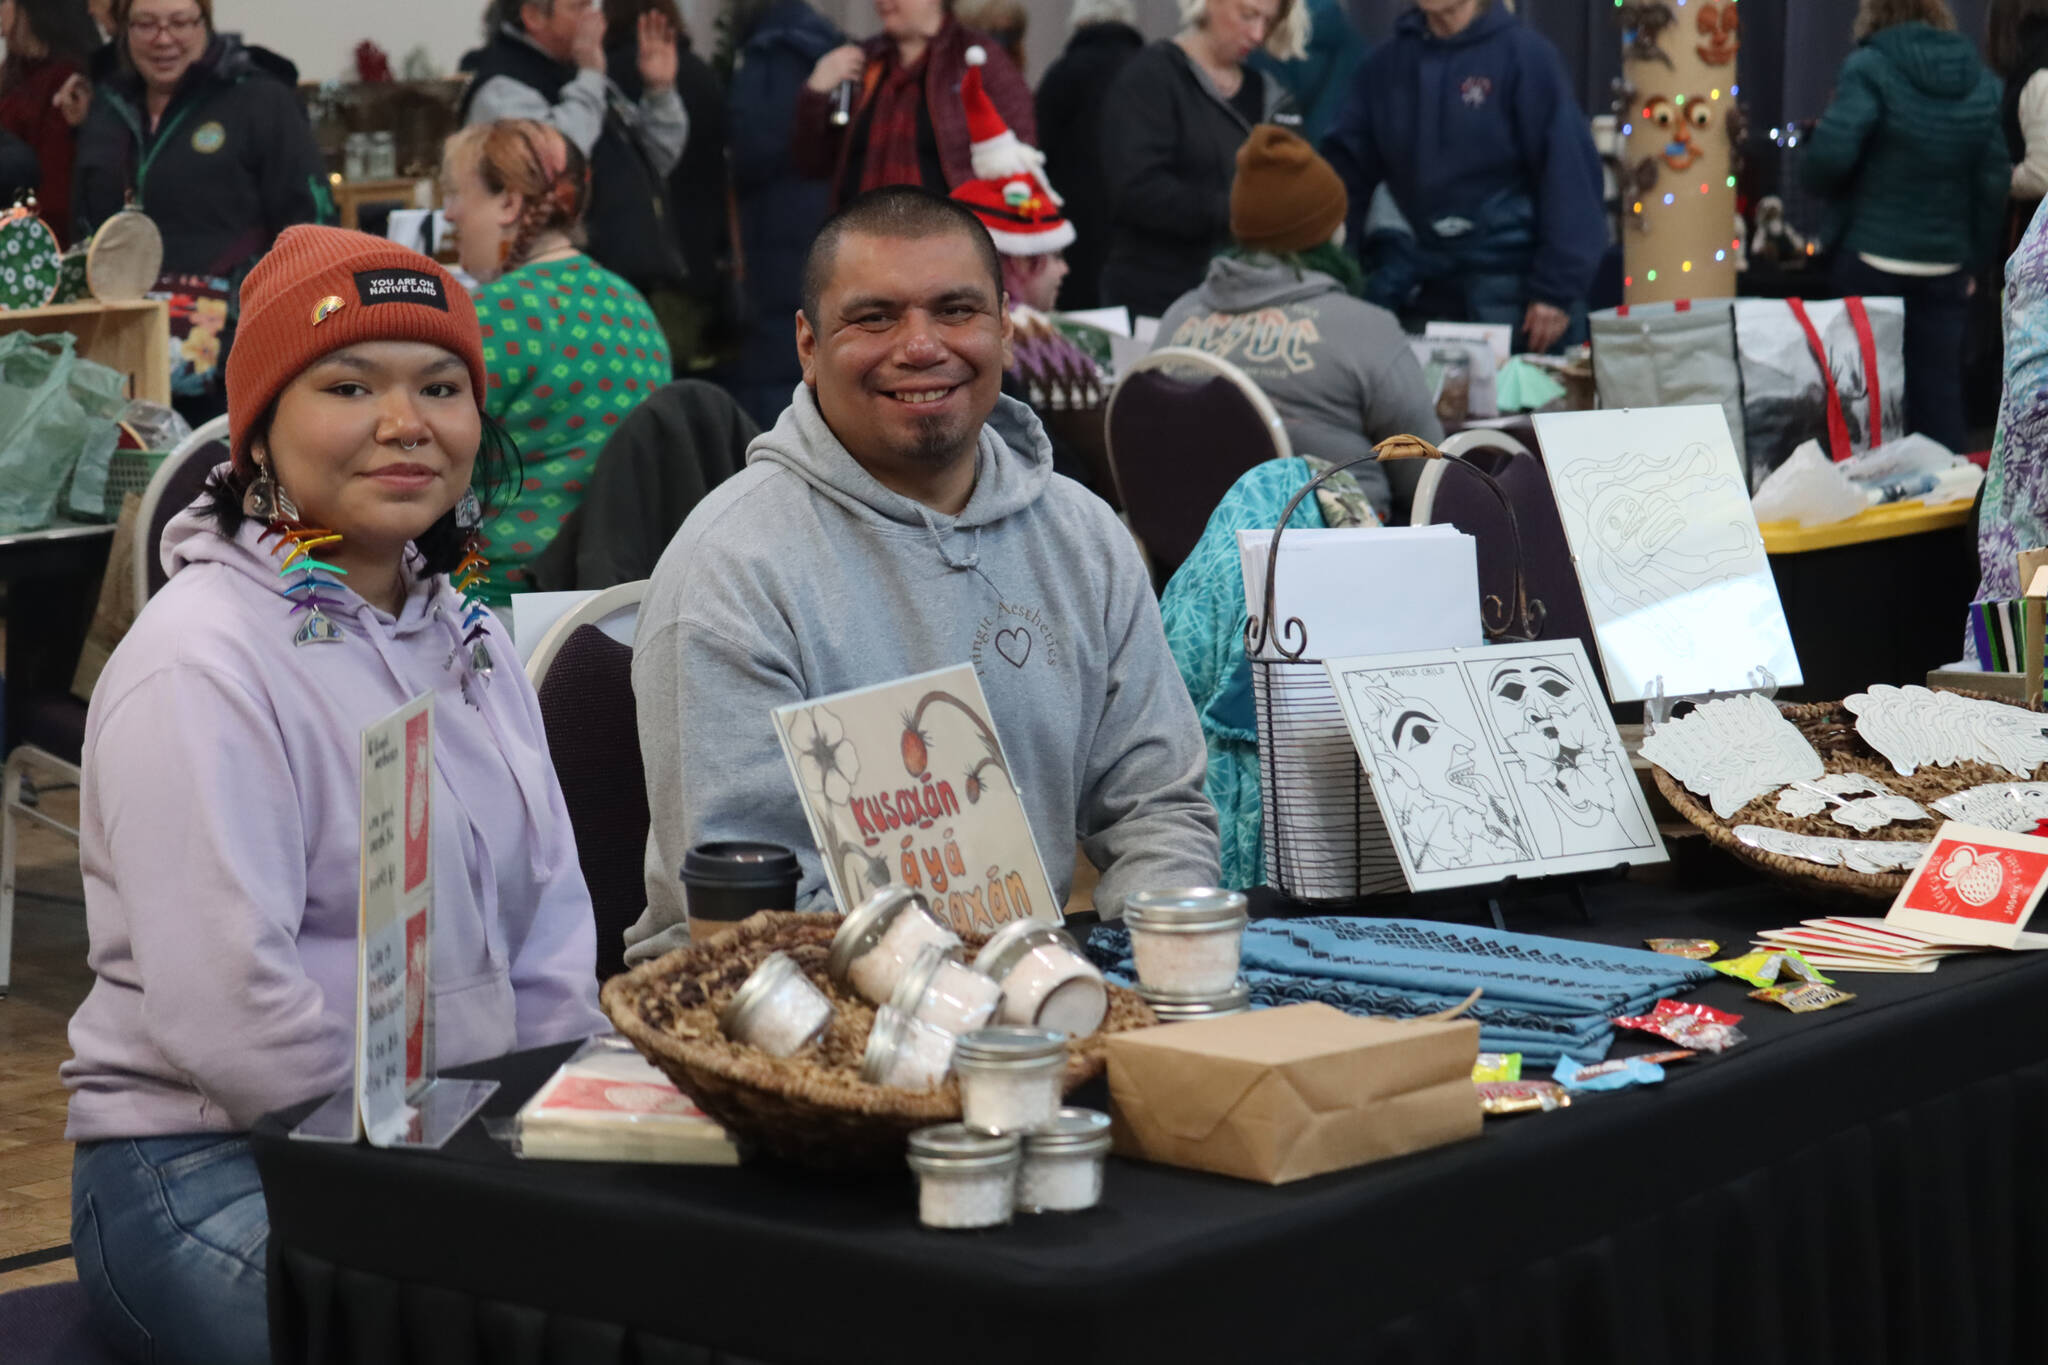 Corinne and Lyle James celebrate their new business venture, Tlingit Aesthetics, selling stickers, prints, cards and apparel at the annual Stocking Stuffer Showcase on Saturday, Dec. 10. (Jonson Kuhn / Juneau Empire)